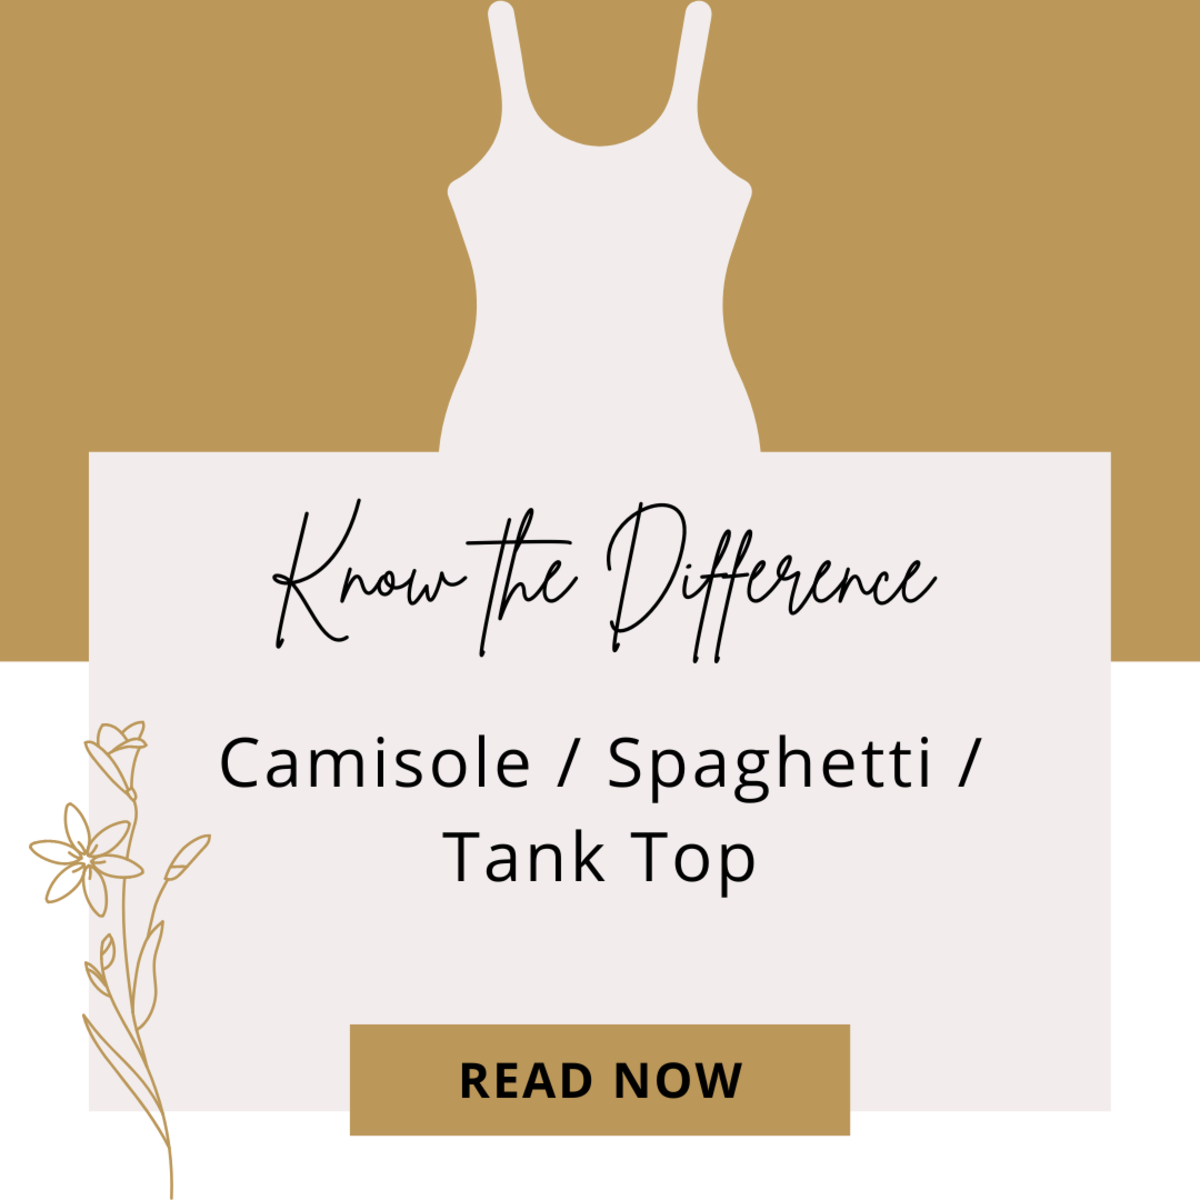 Understanding the Difference Between a Camisole, Spaghetti, and a Tank Top